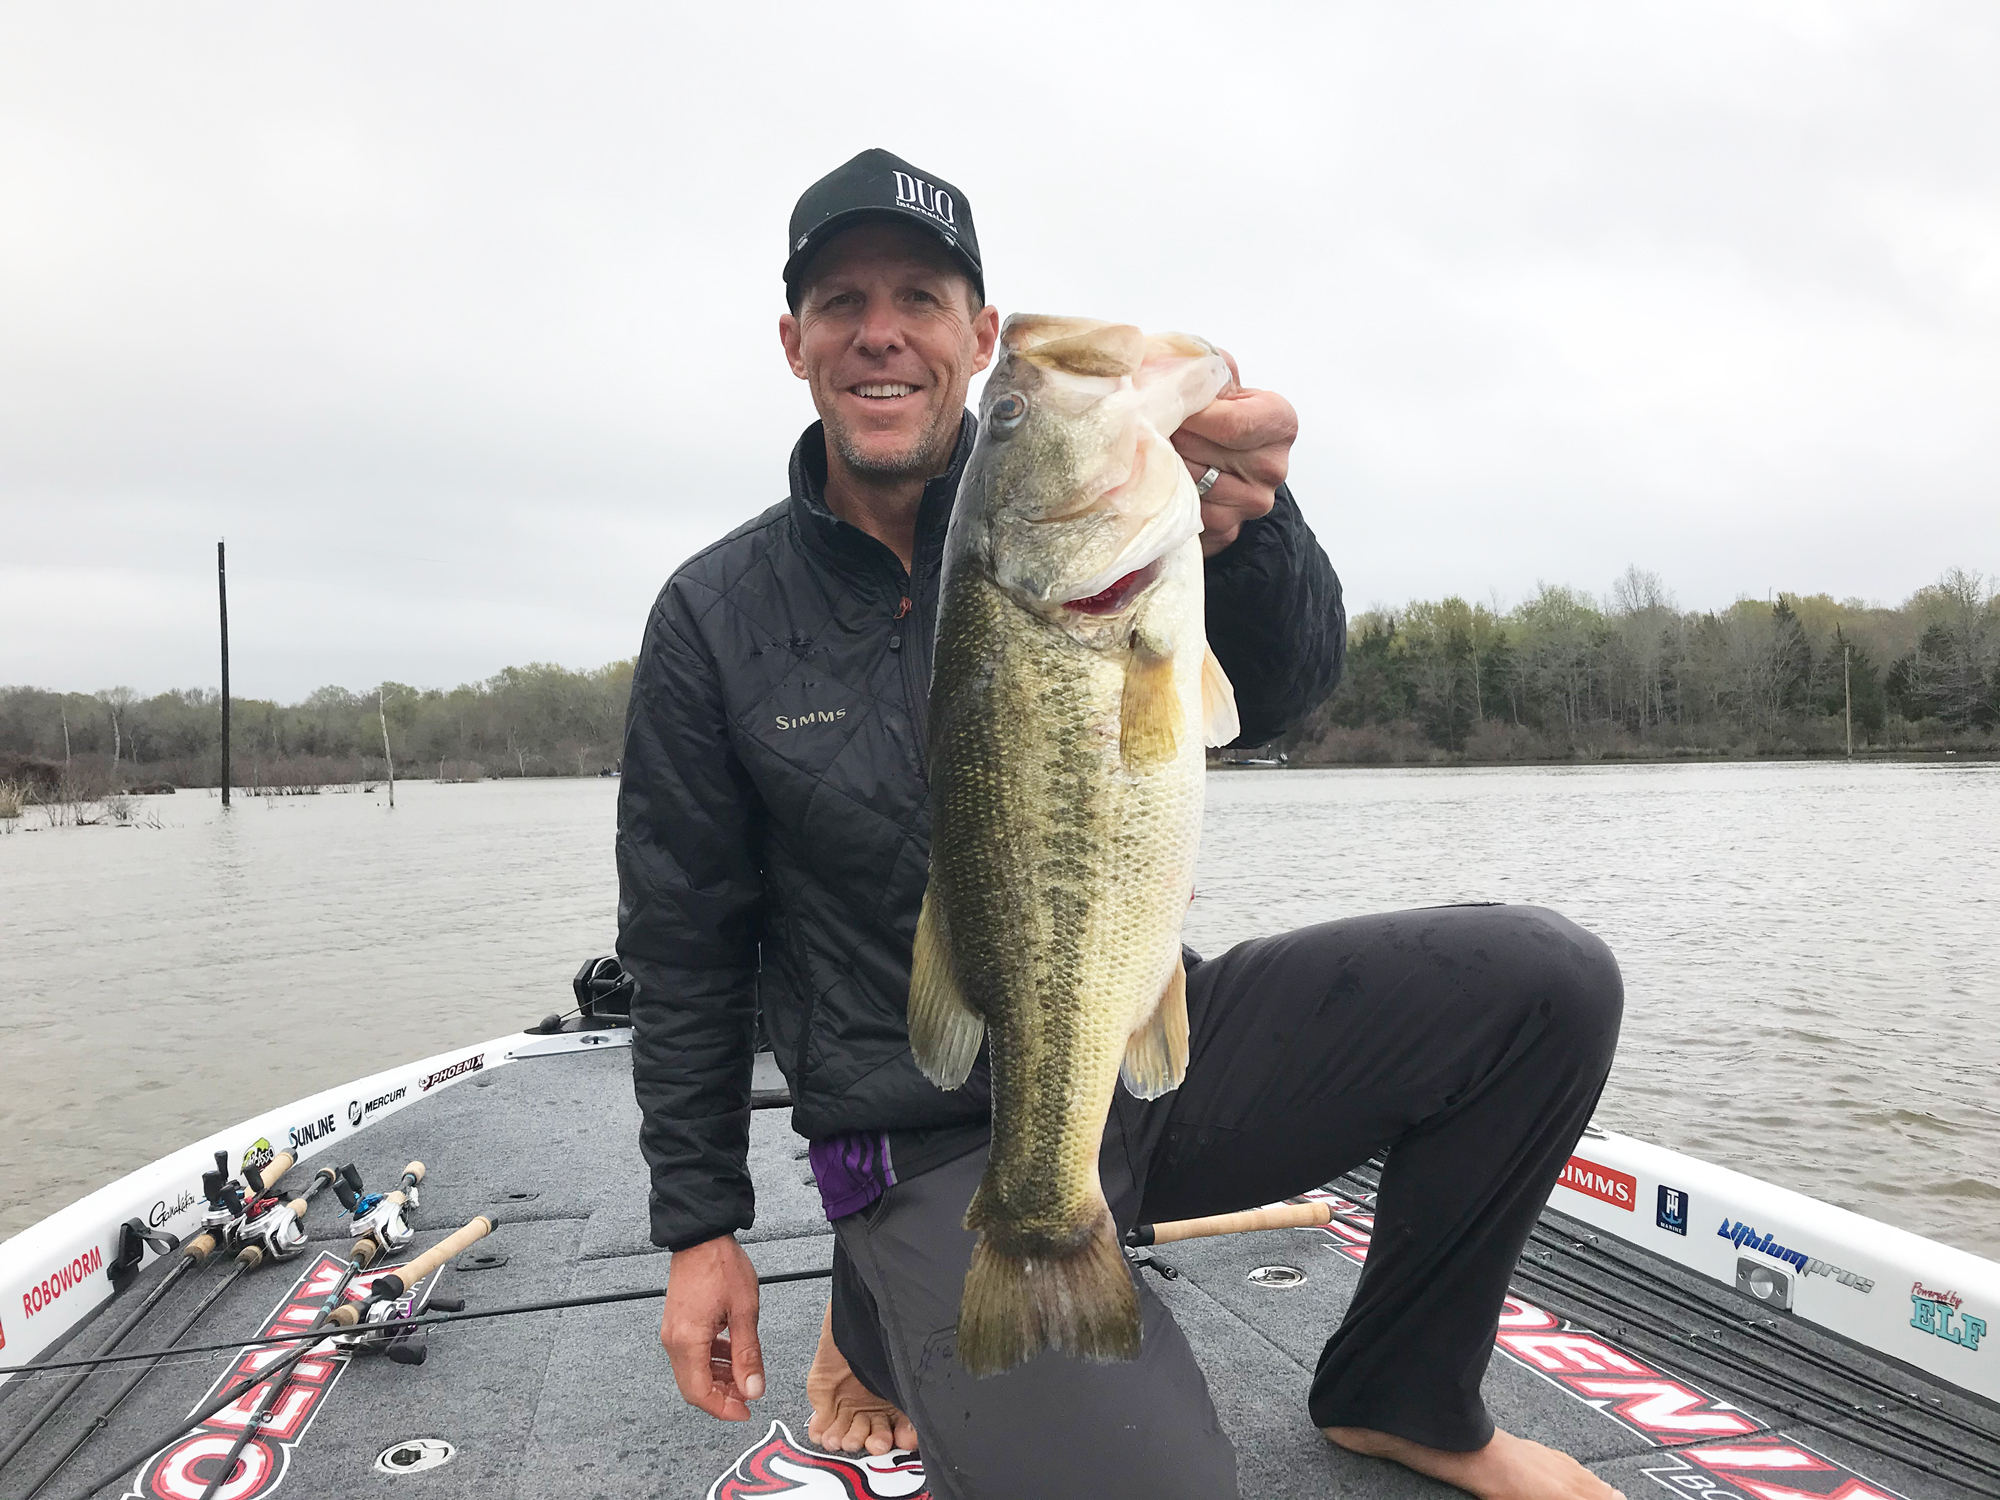 LIVE BLOG: Big Ones in Bunches and It's Only Day 1 - Major League Fishing